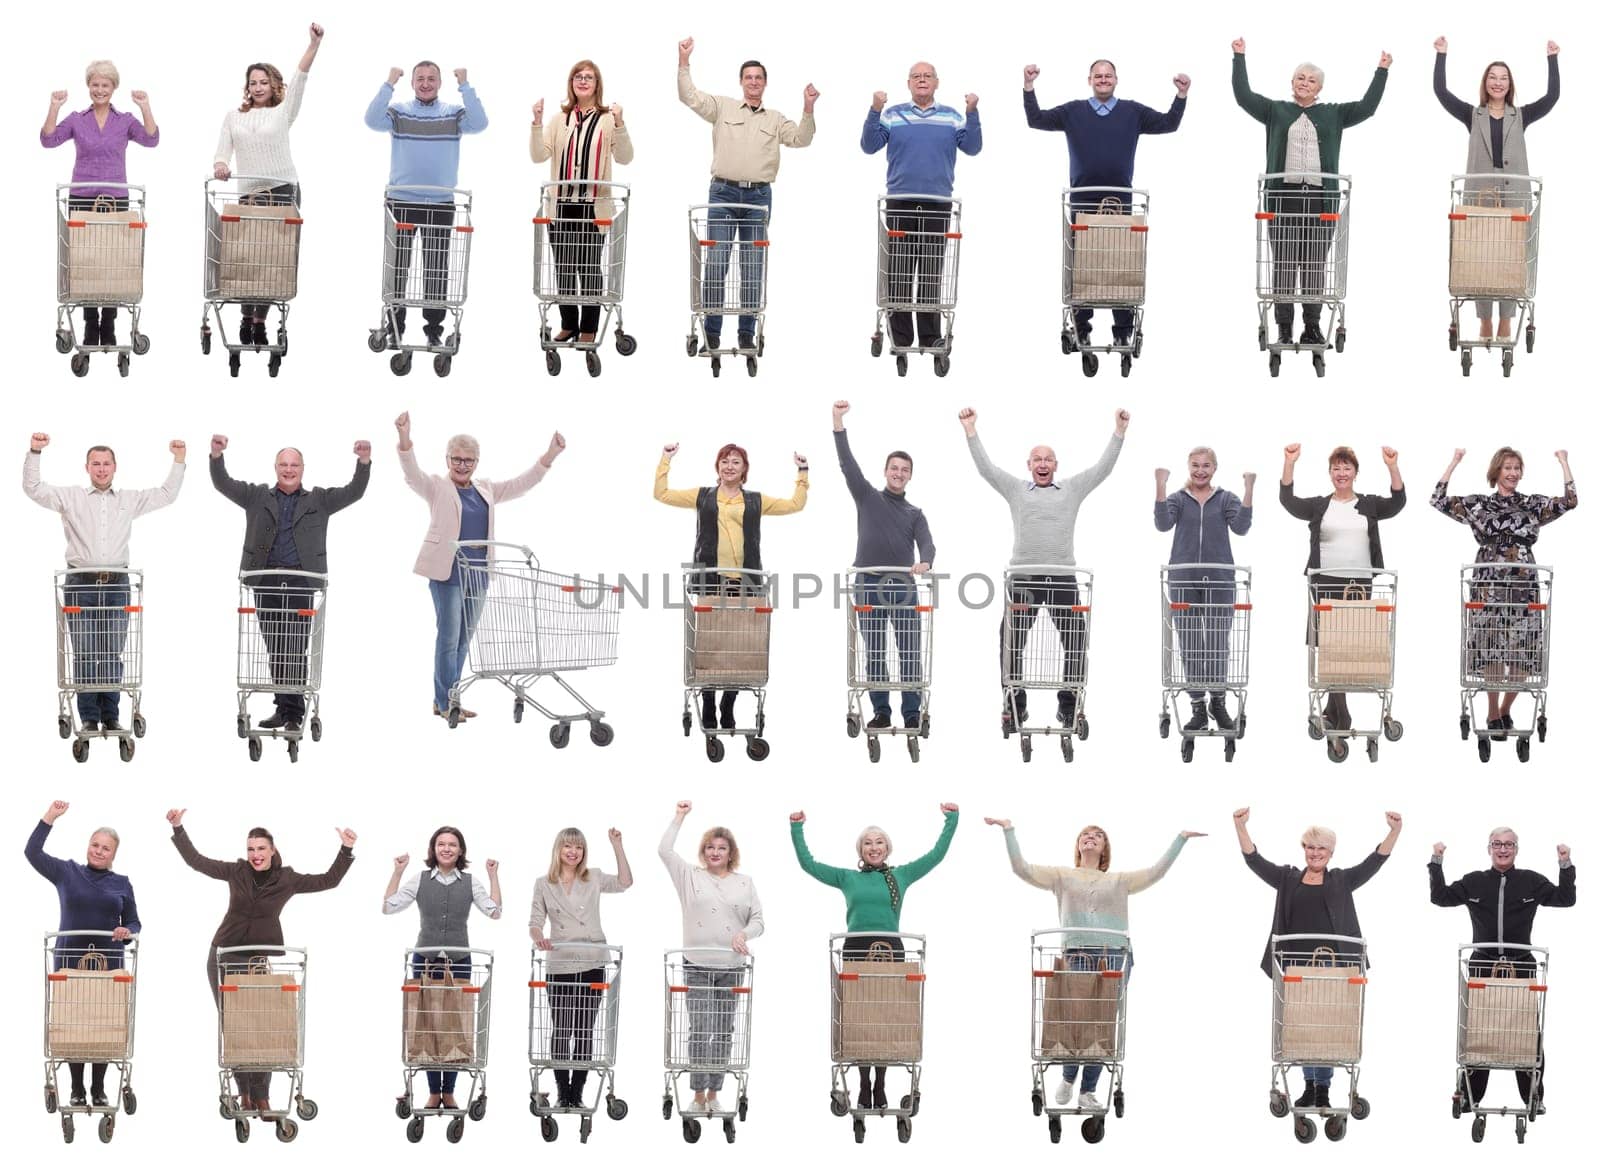 group of people with cart raised their hands up isolated on white background